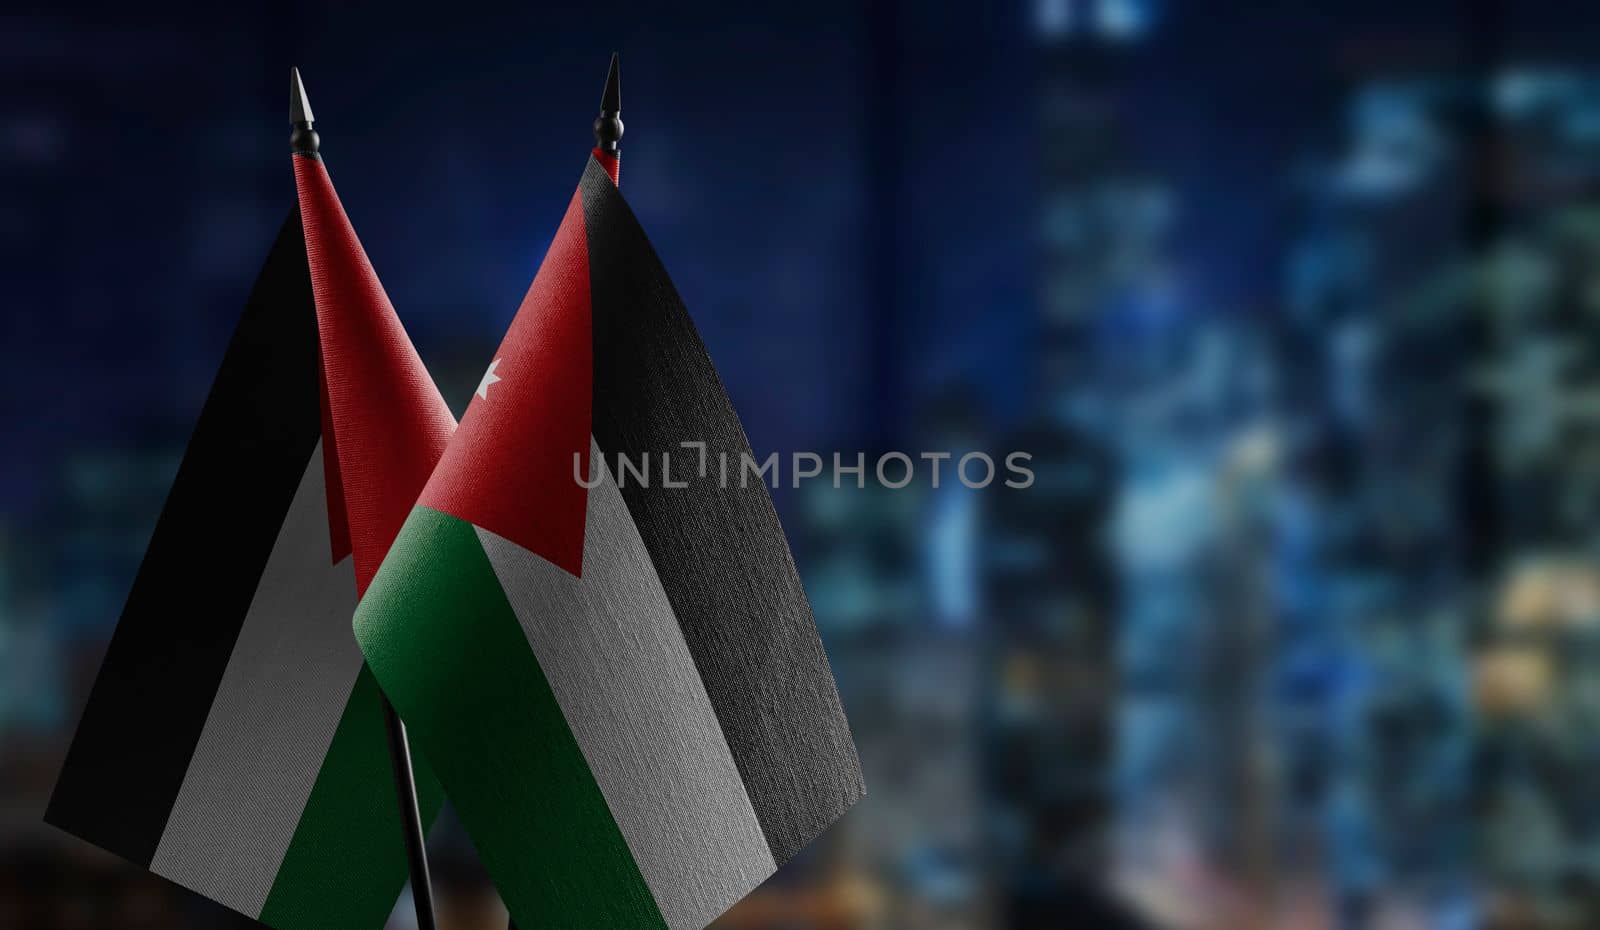 Small flags of the Jordan on an abstract blurry background by butenkow